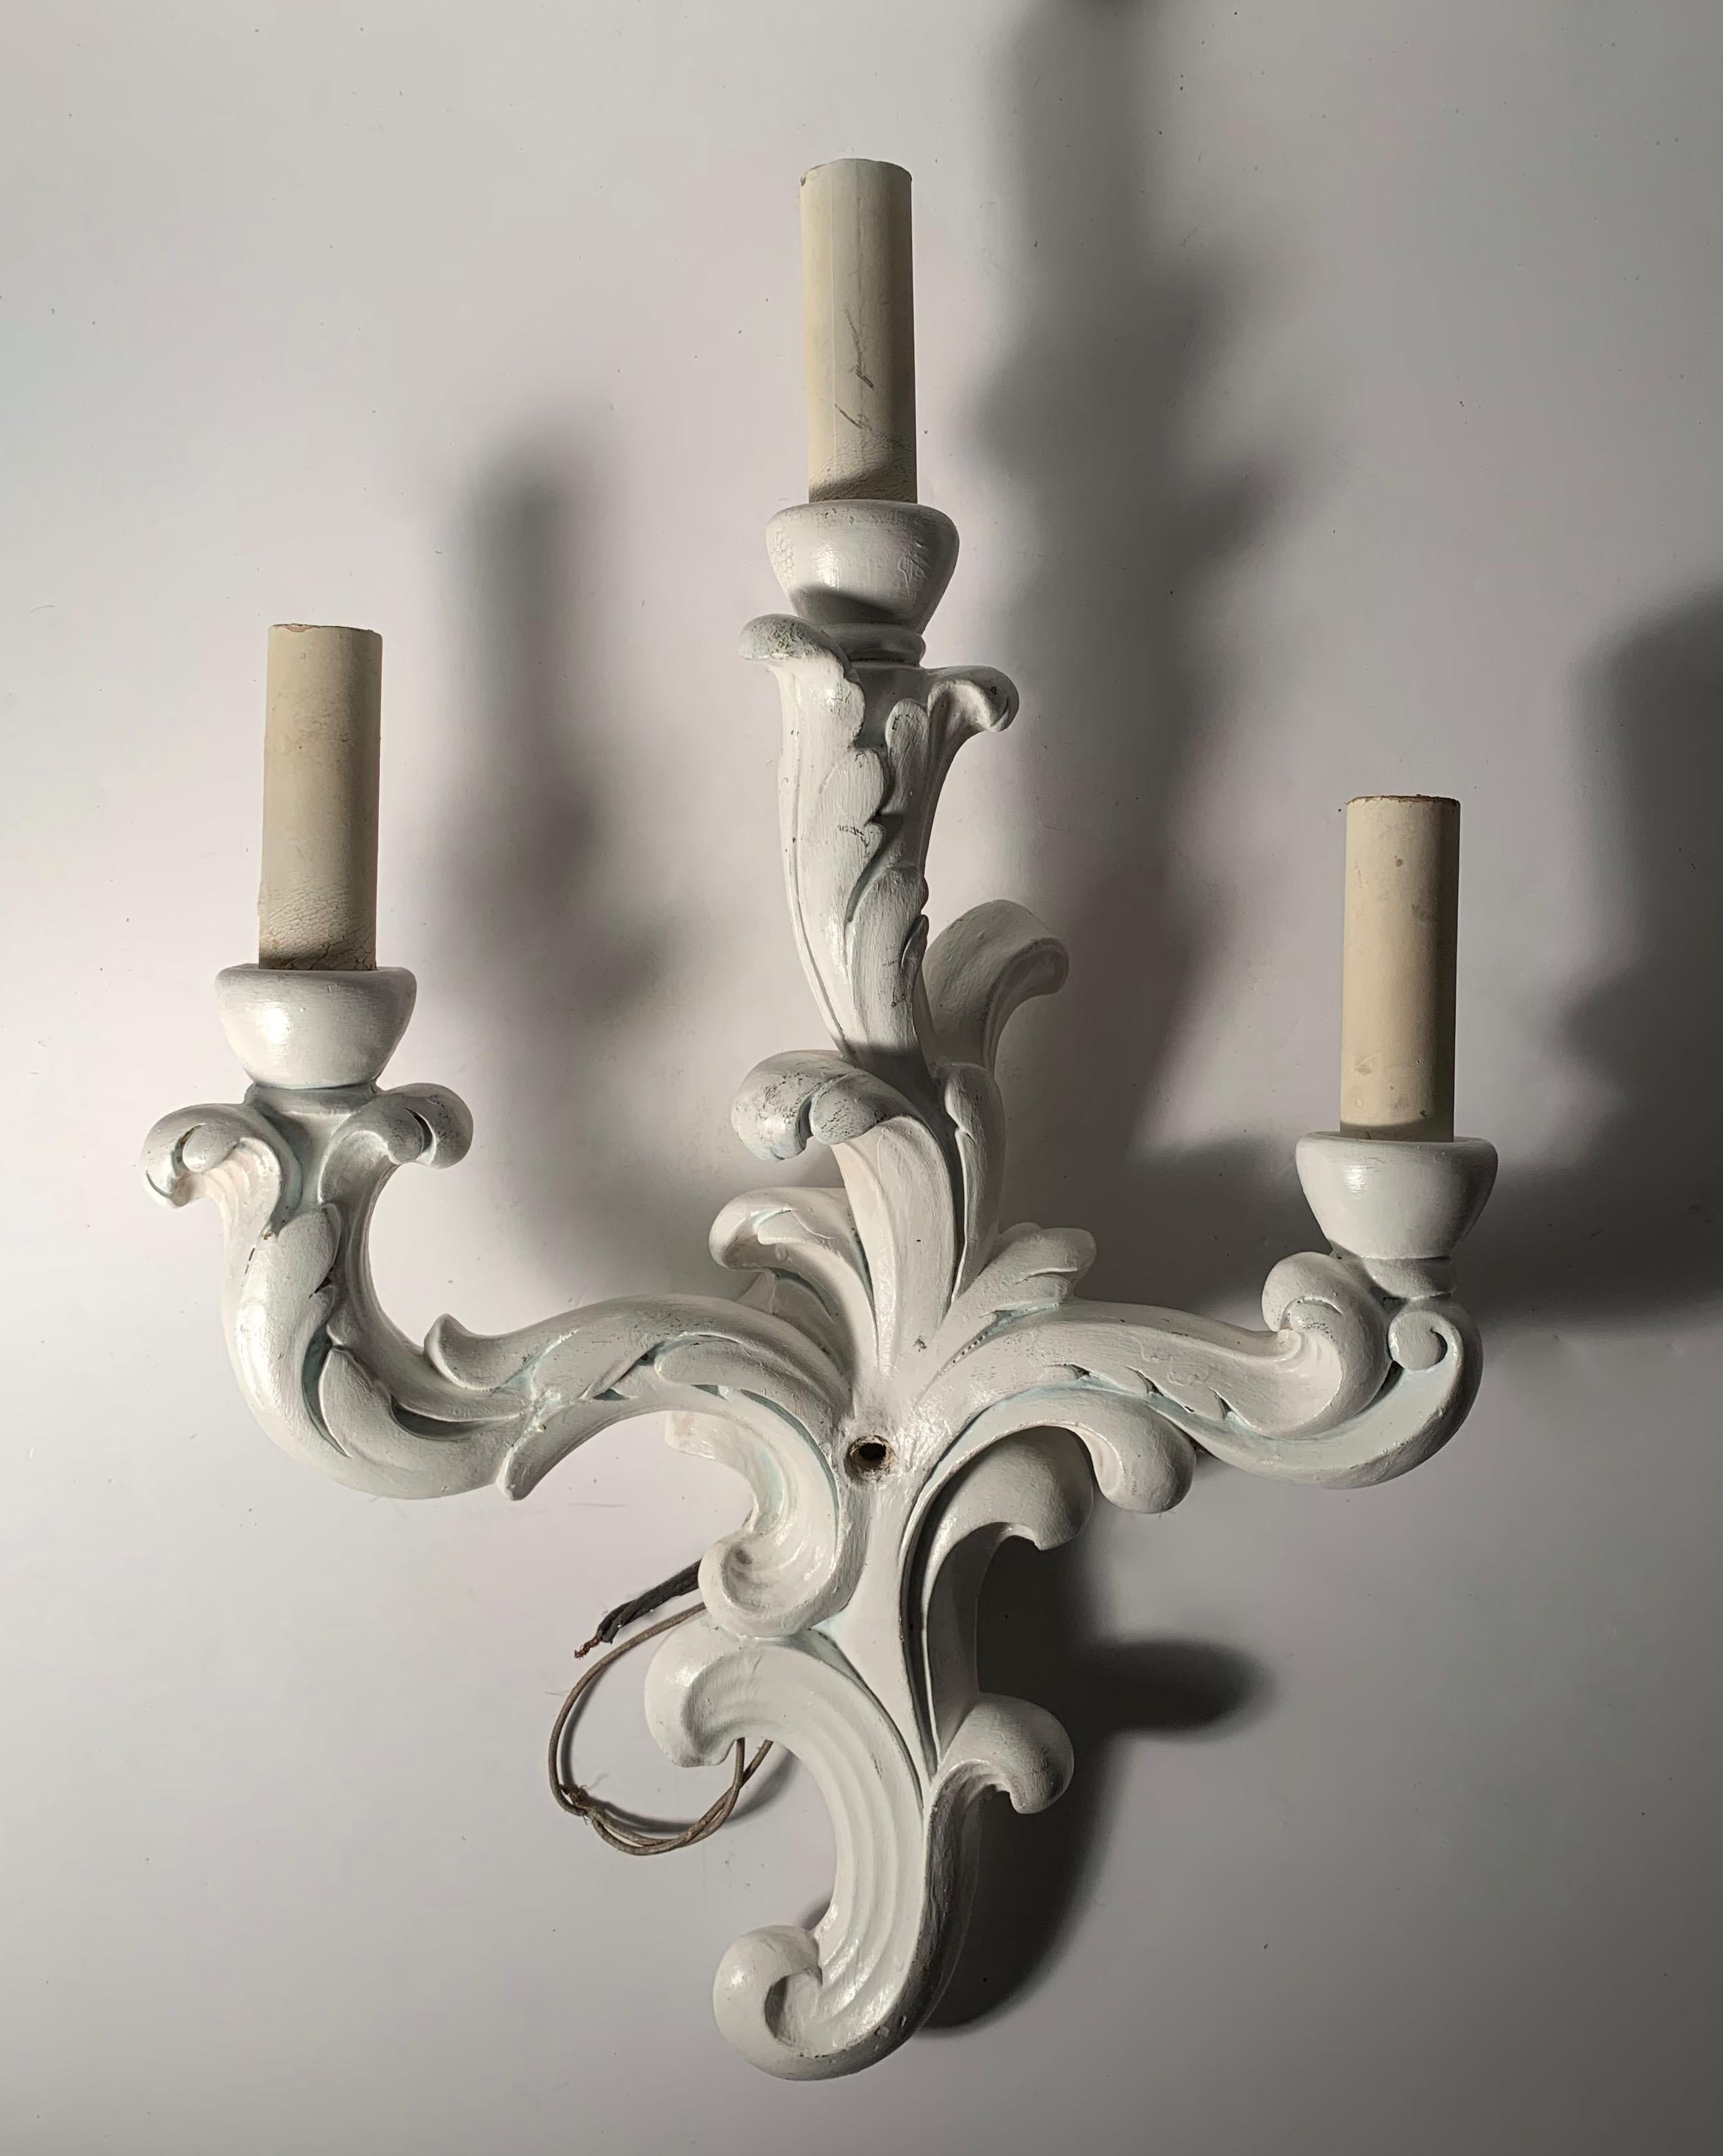 1940s Plaster Wall Candelabra Lamp Sconces manner Serge Roche / Dorothy Draper In Good Condition For Sale In Chicago, IL